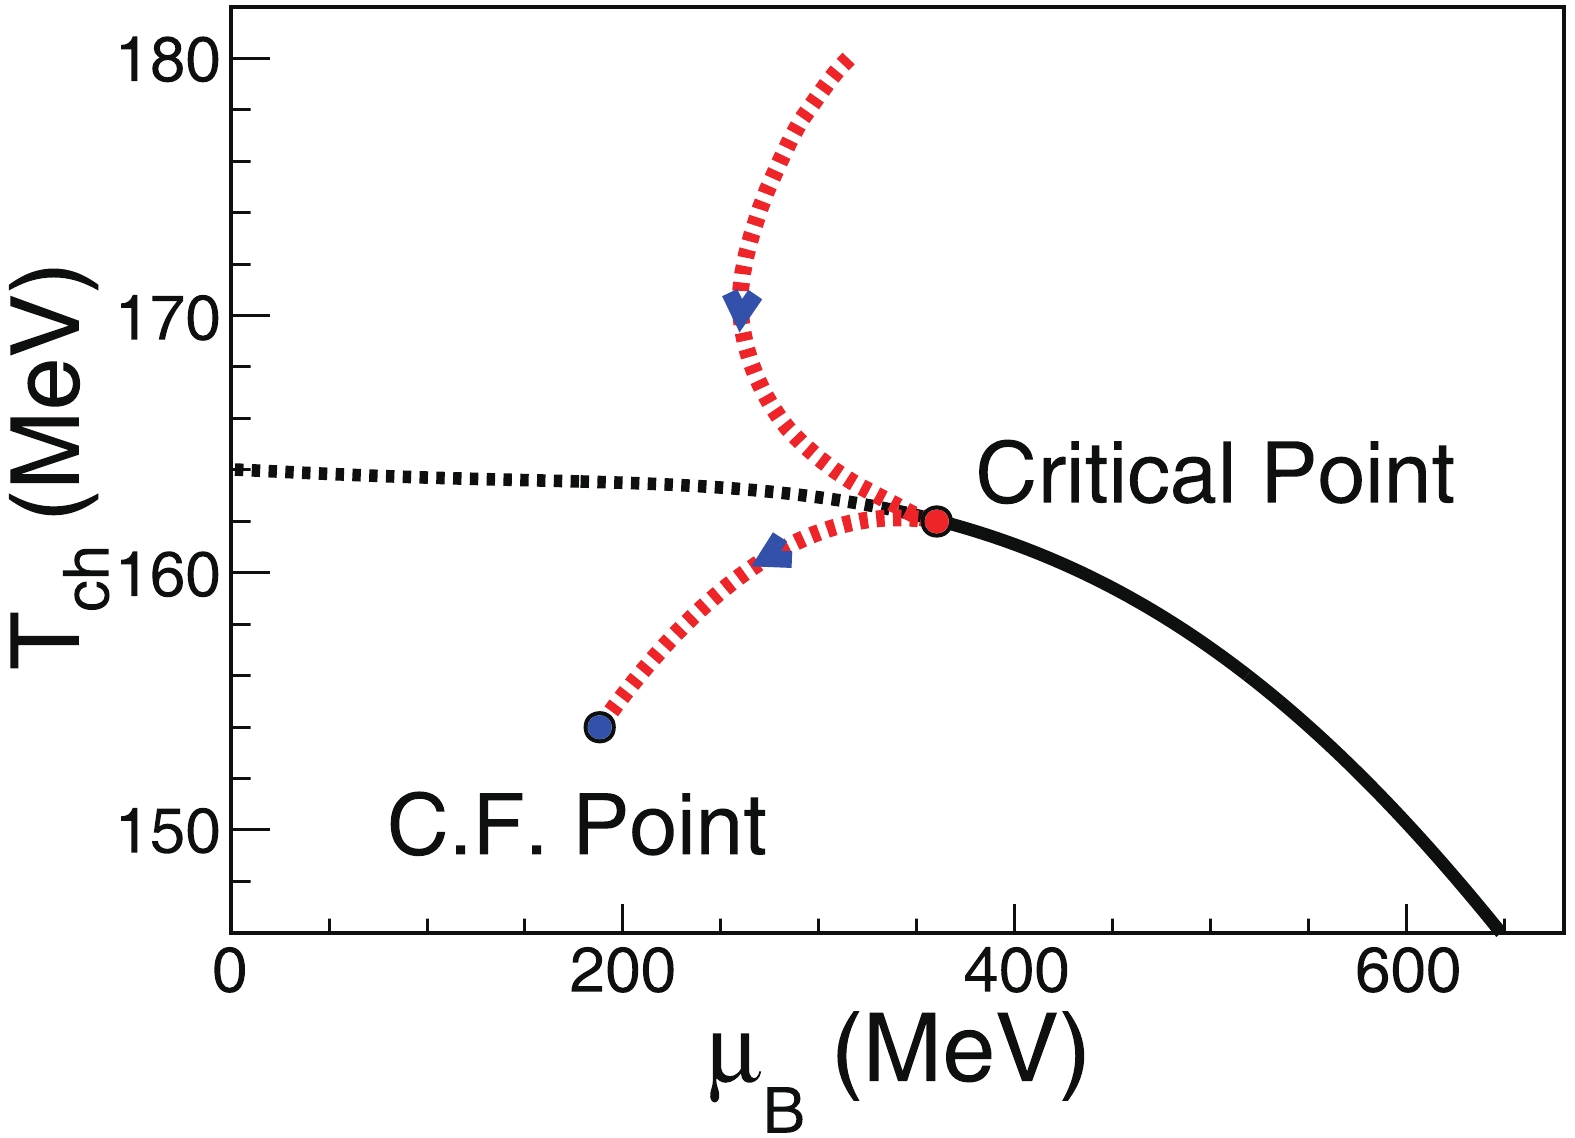 (color online) Sketch of conjectured QCD phase diagram with crossover (black dashed line), order phase transition boundary (black solid lines), and QCD critical point (red solid circle, MeV). A hypothetical system evolution trajectory (red dashed lines) is also plotted and ends with the chemical freeze-out point (blue solid circle).